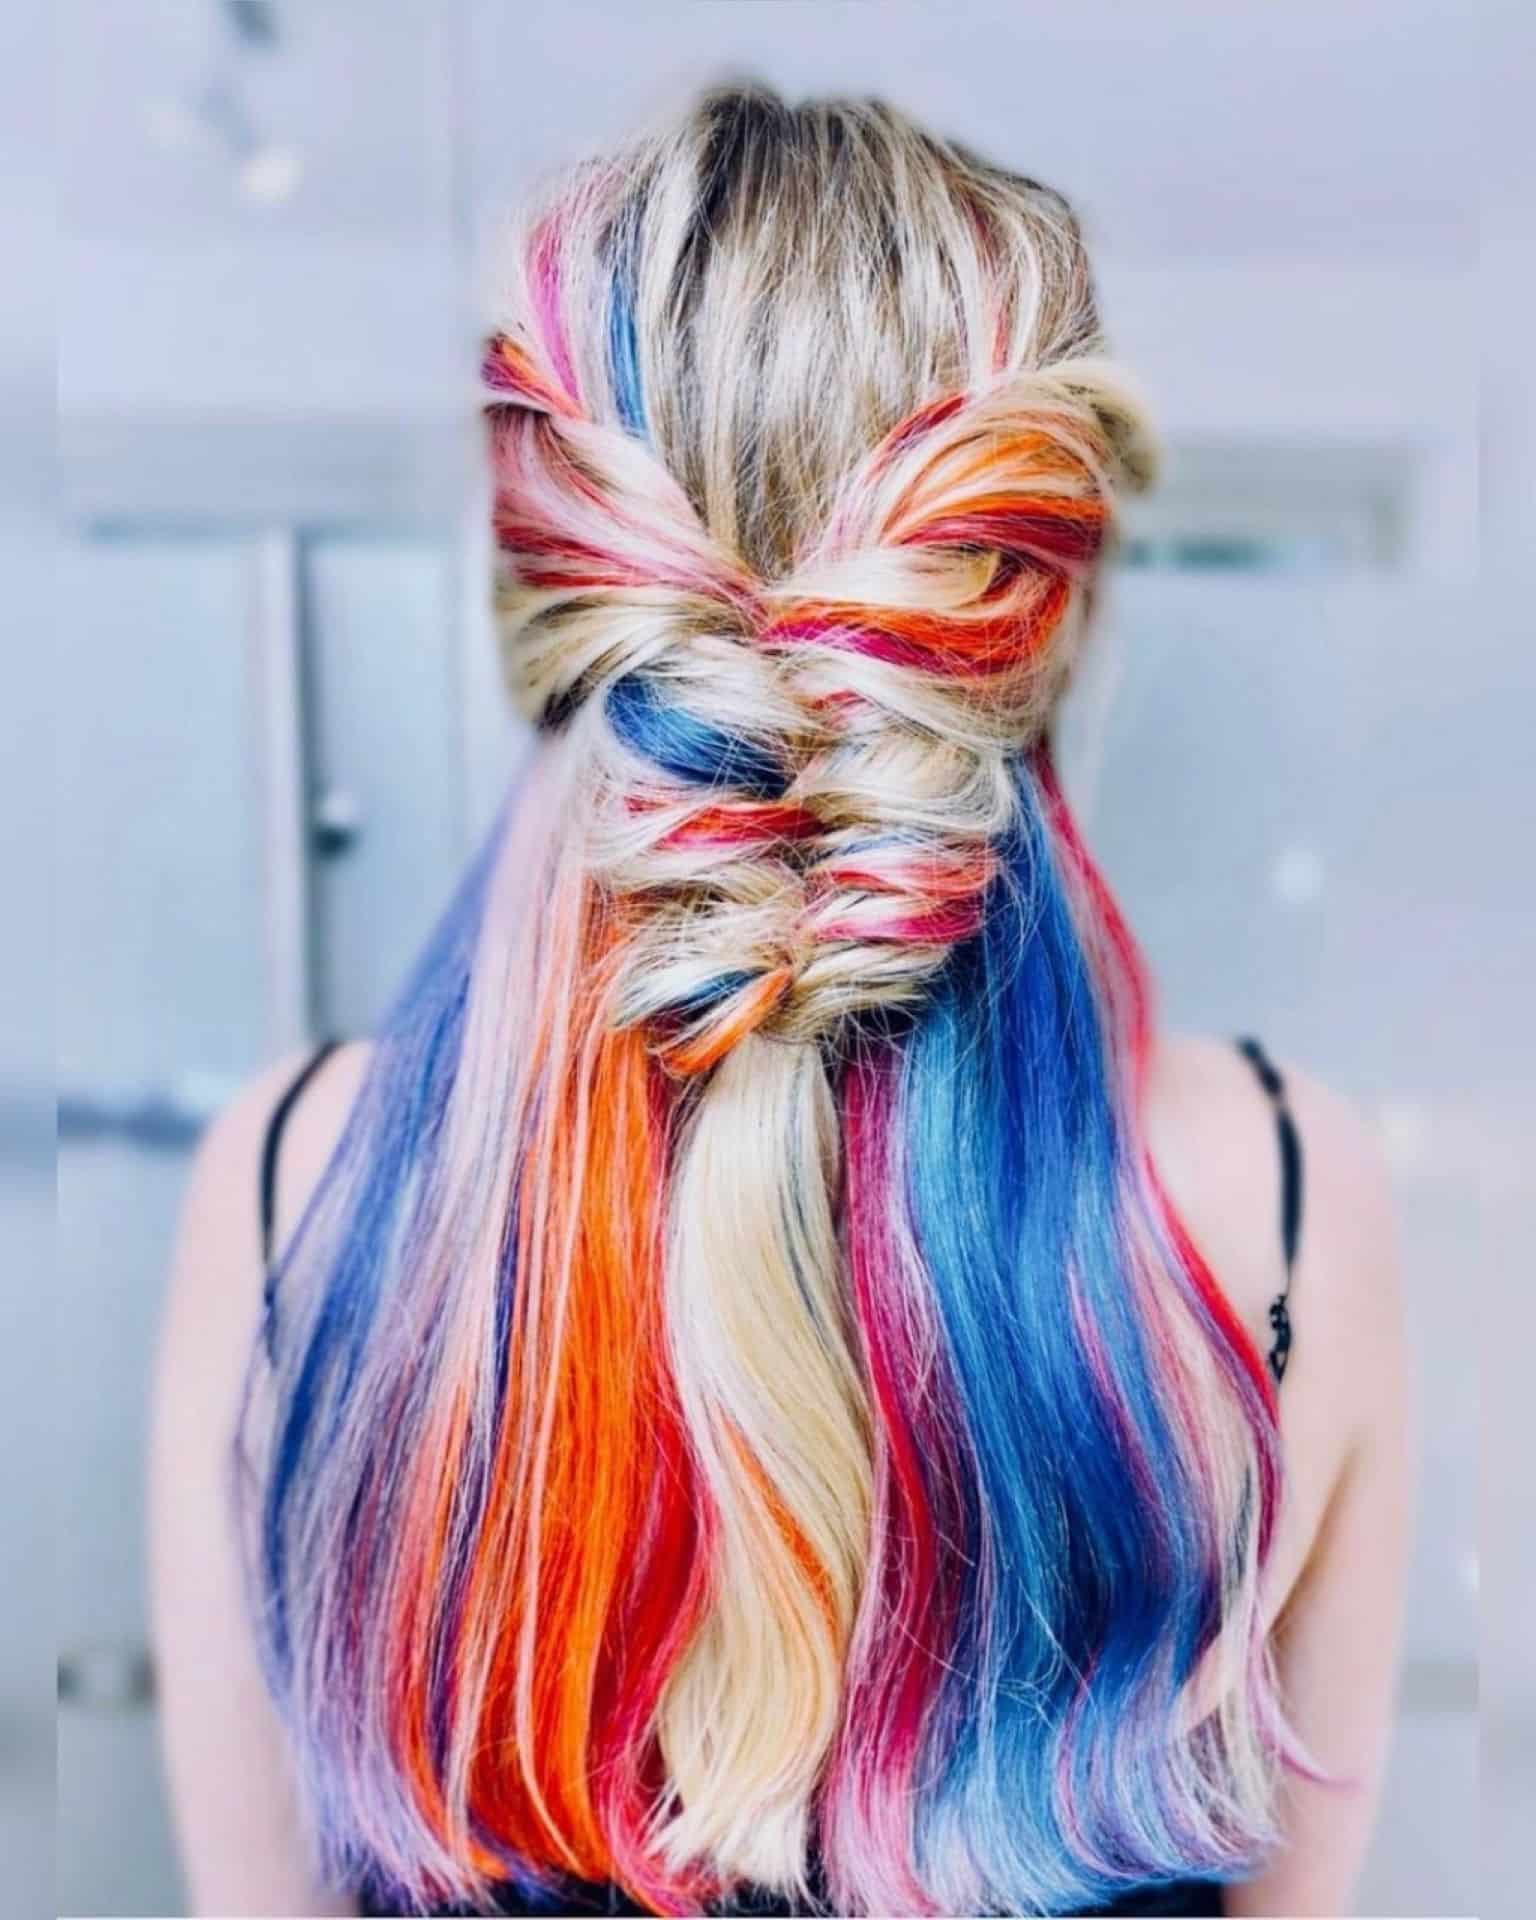 Woman with colourful hair